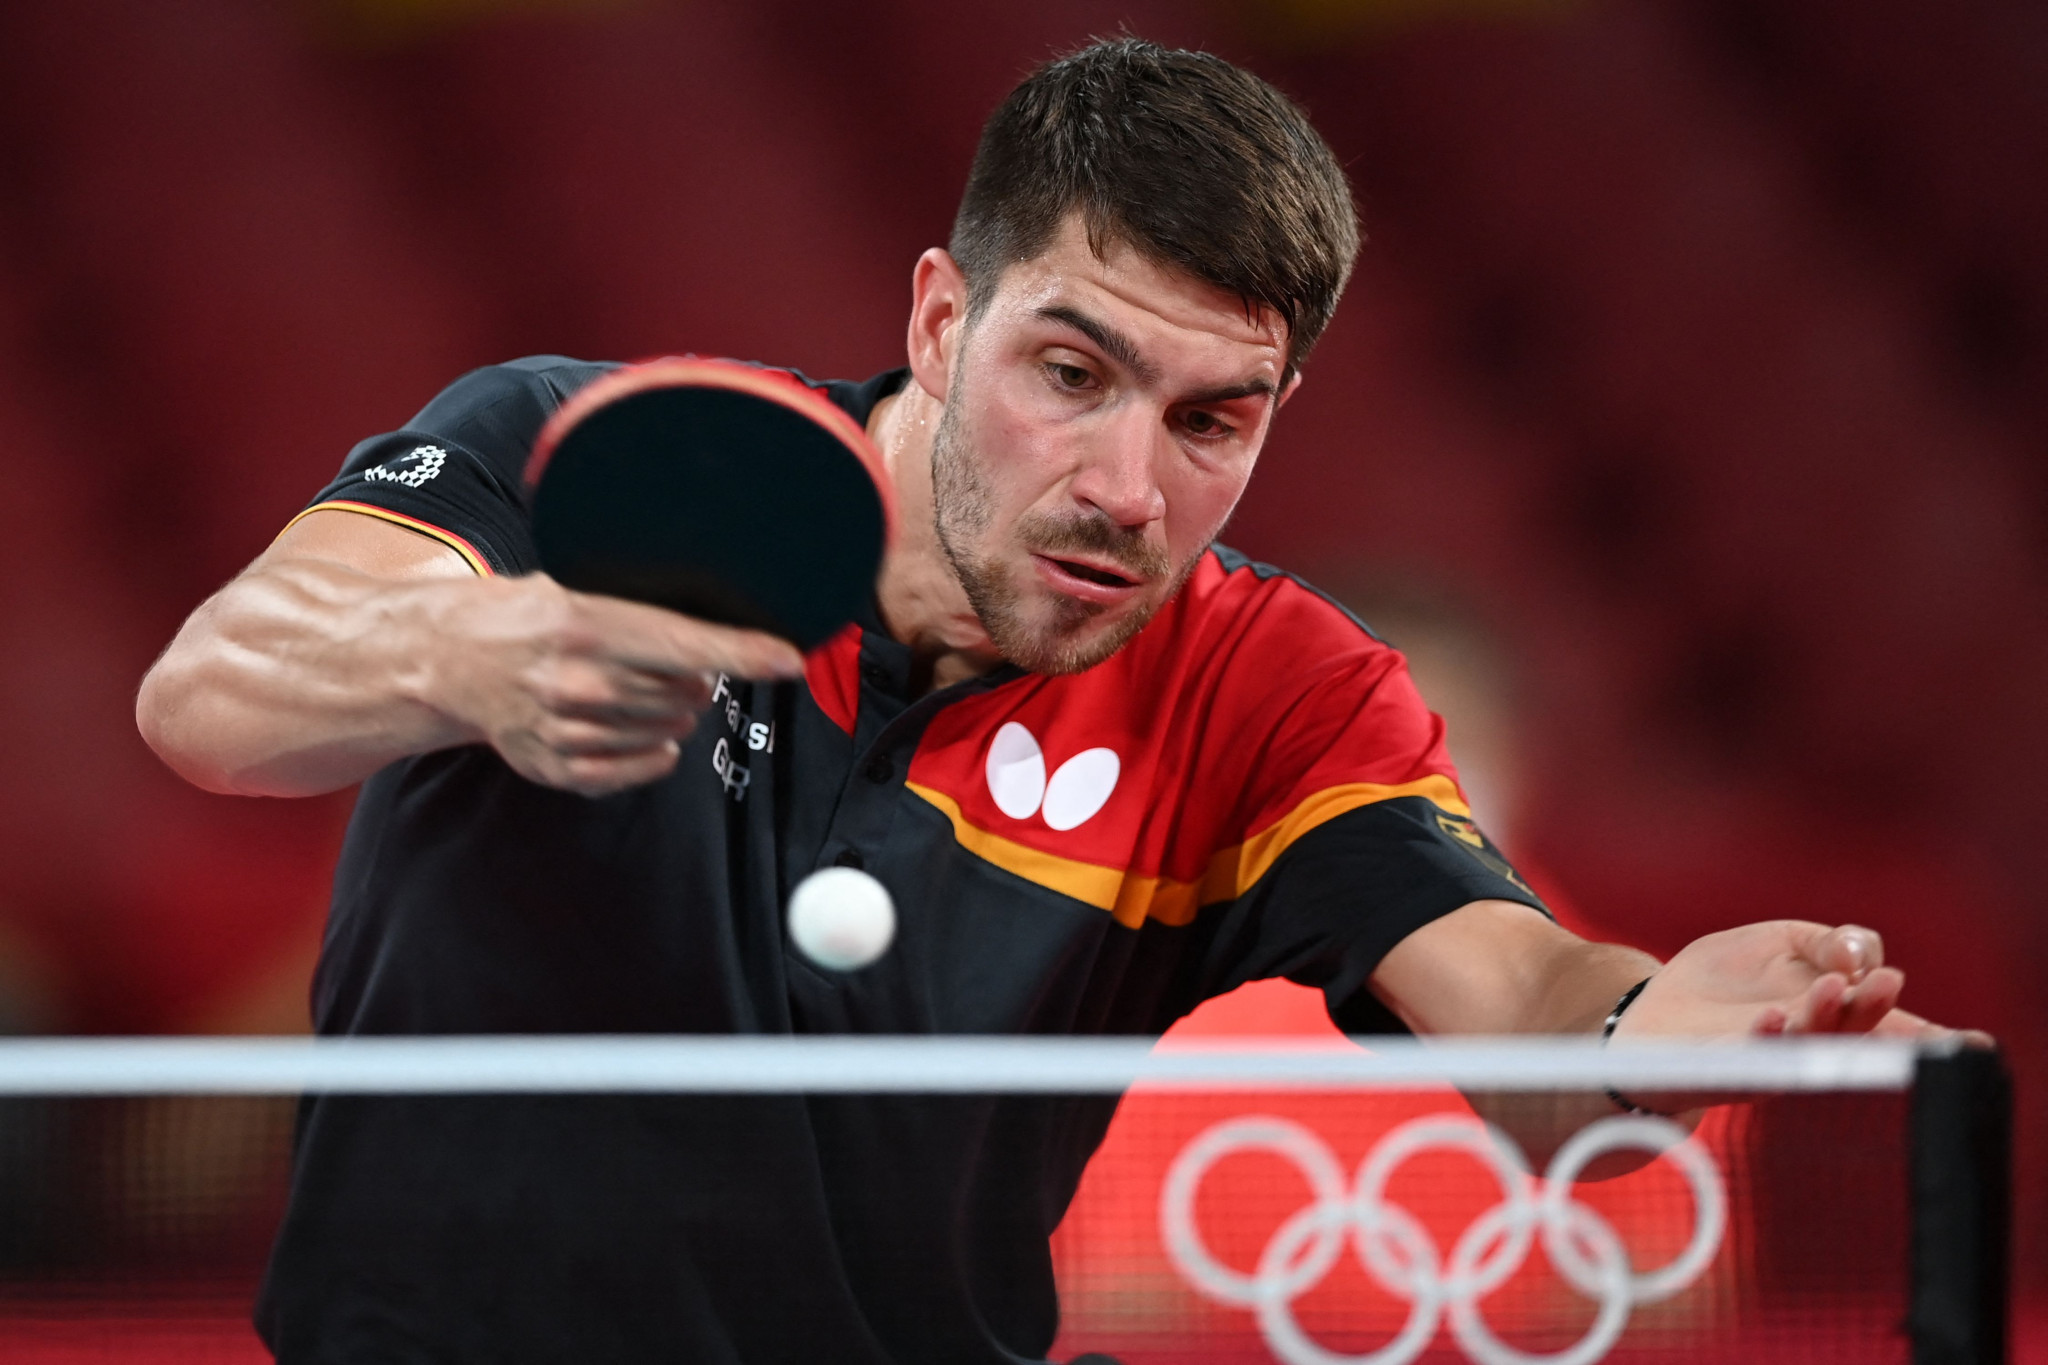 German top seed Patrick Franziska had to come from behind twice to progress against Portugal's Tiago Apolónia ©Getty Images